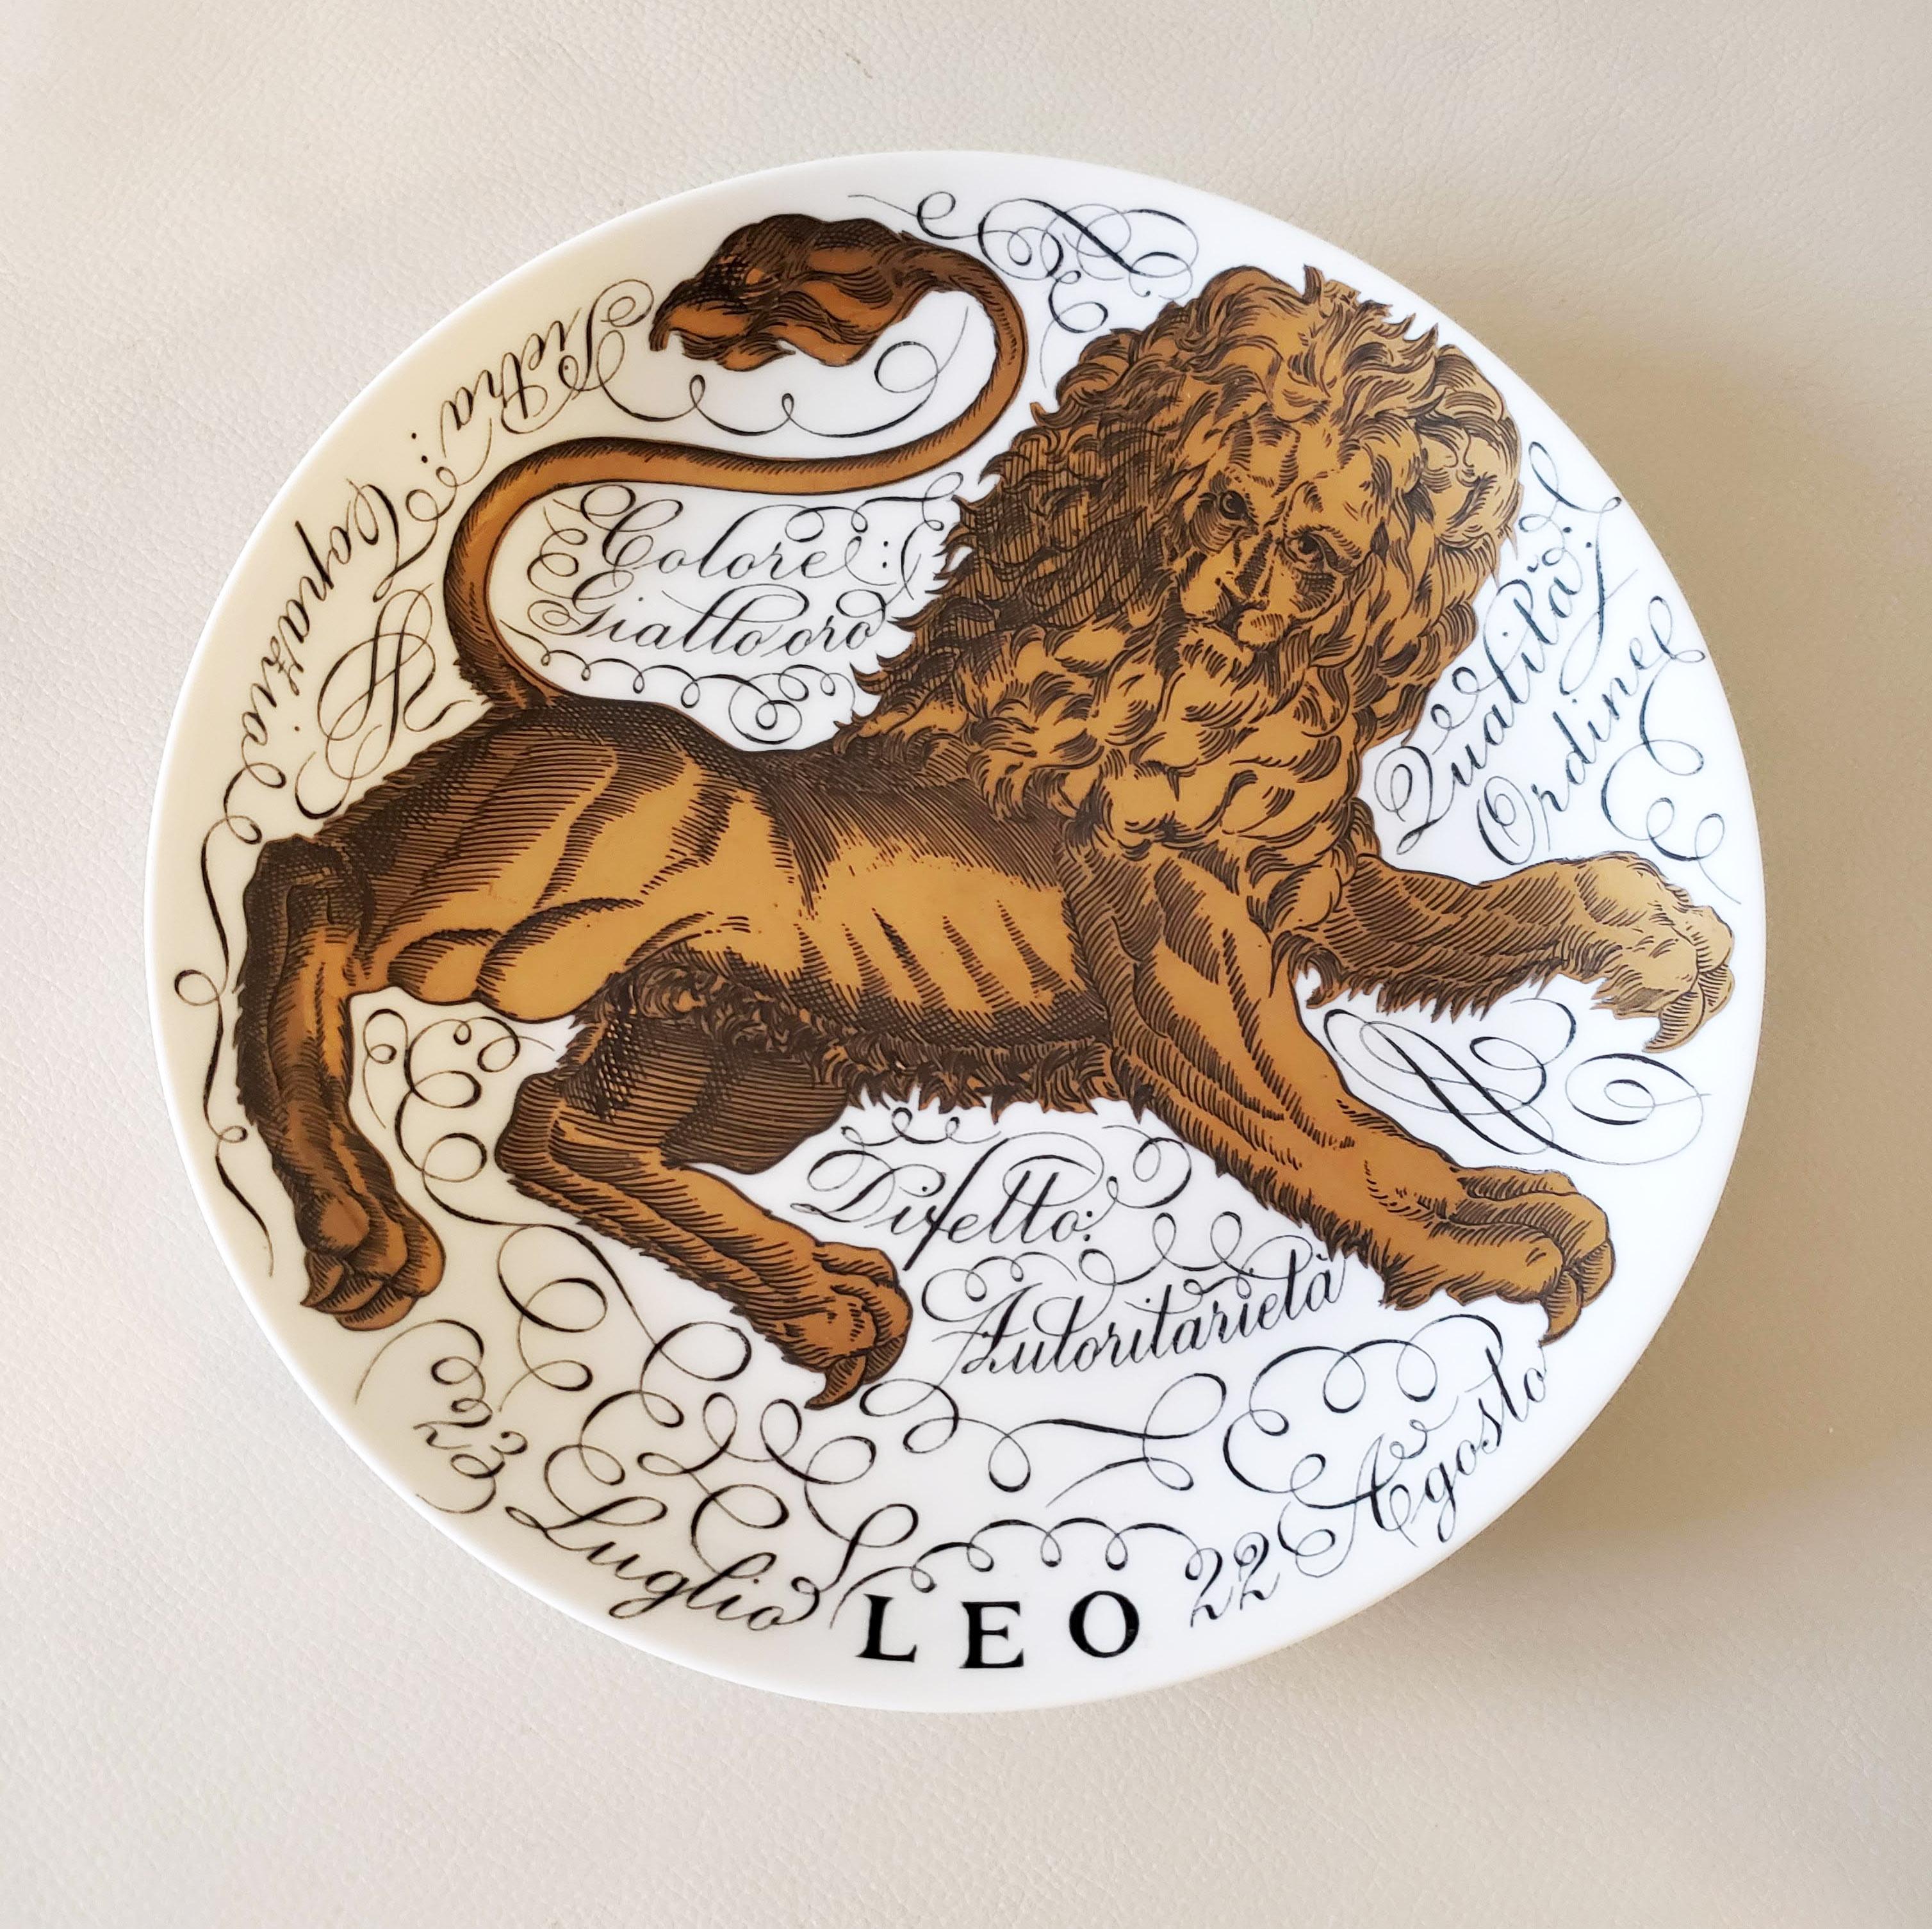 Vintage Piero Fornasetti porcelain Zodiac plates,
Astrali pattern,
Complete set of twelve.
Made for Corisia,
Dated 1964-1975.
 
Each plate depicts a different Astrological Zodiac sign painted in gold. Around each sign are words describing the